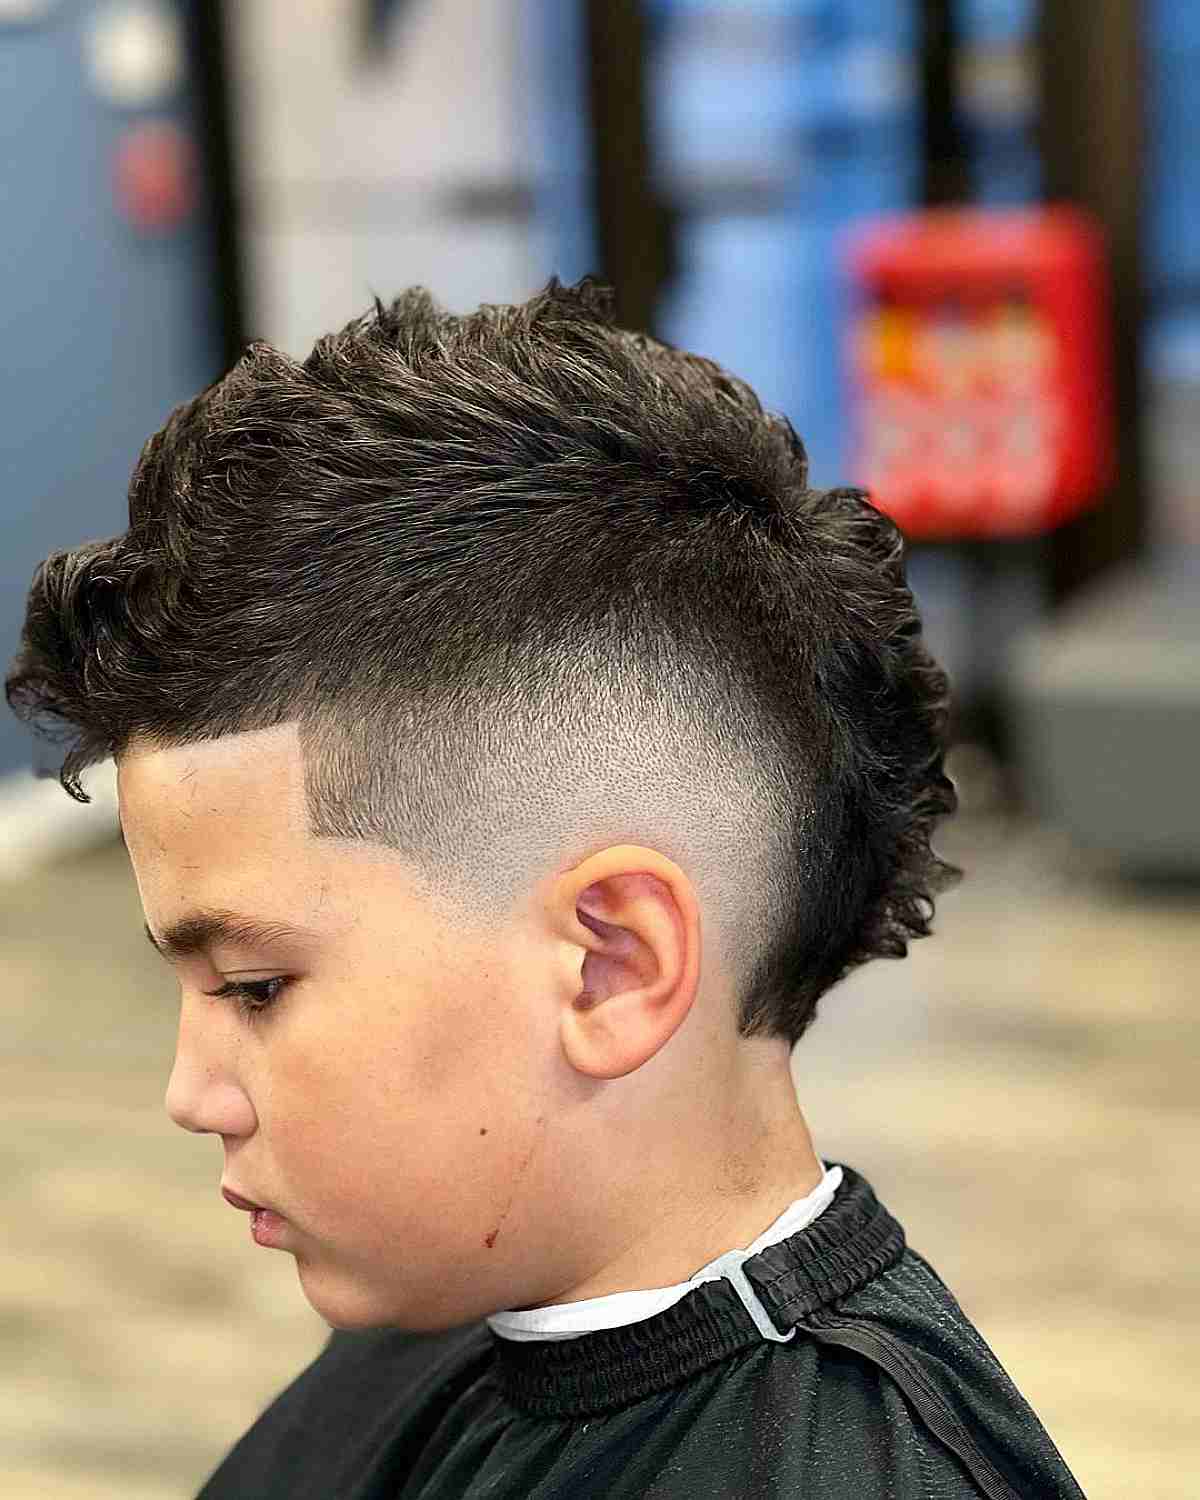 Kids Hairstyles with Hard Part Haircuts - 20 Ideas and Pictures!